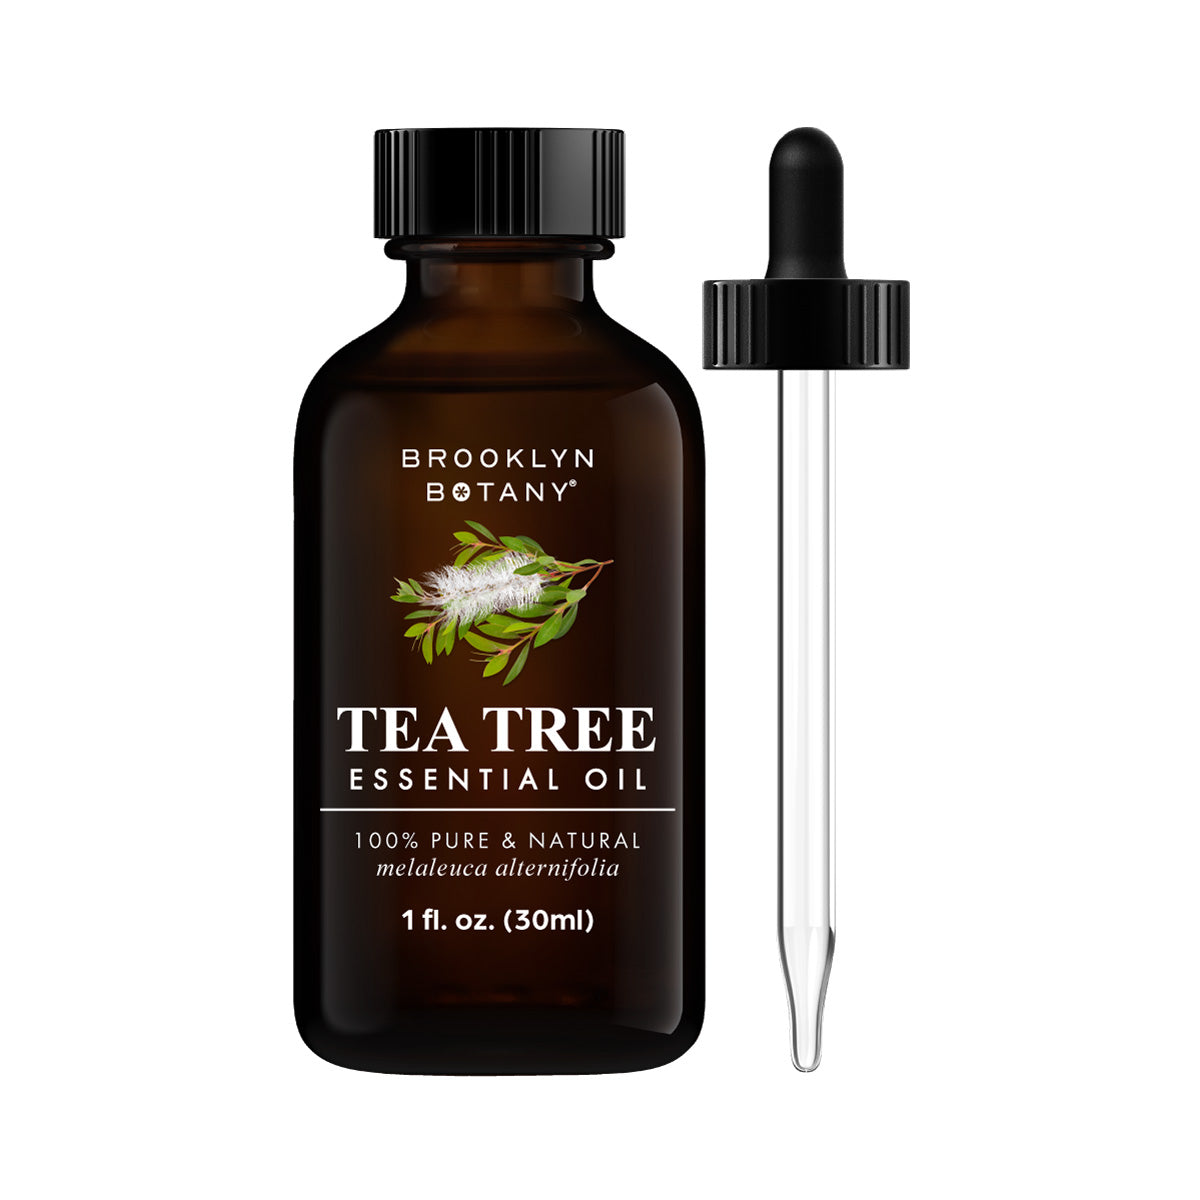 Shopify-BB-30ml-Tea-Tree-Essential-Oil-Main-Image-with-Sides.jpg